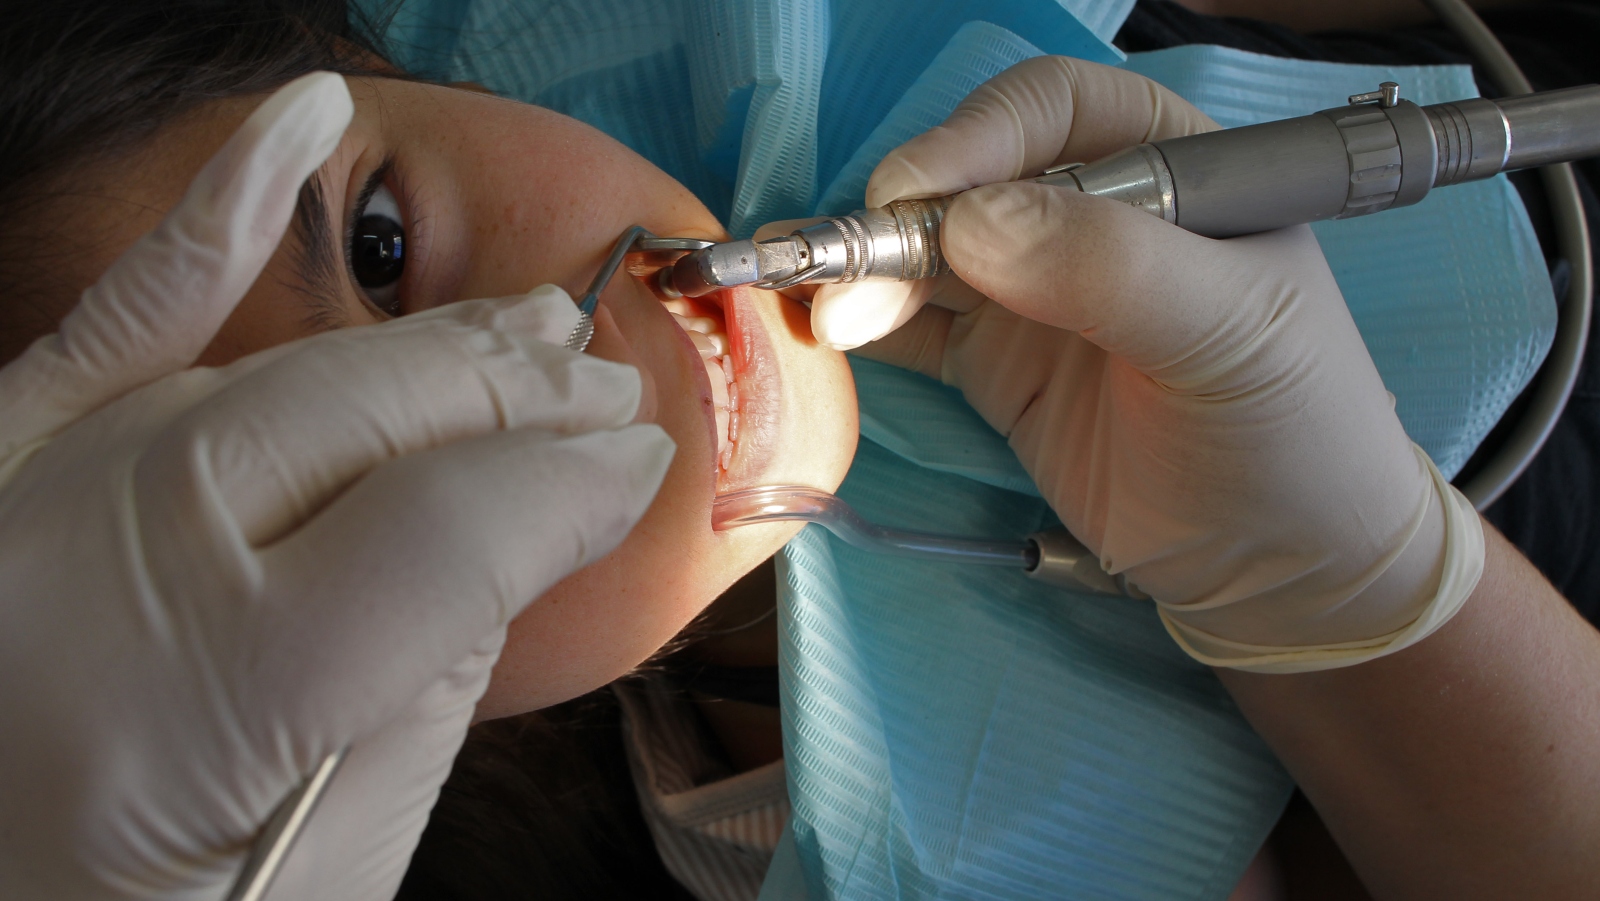 A young dental patient in Jerusalem. Photo by Nati Shohat/FLASH90